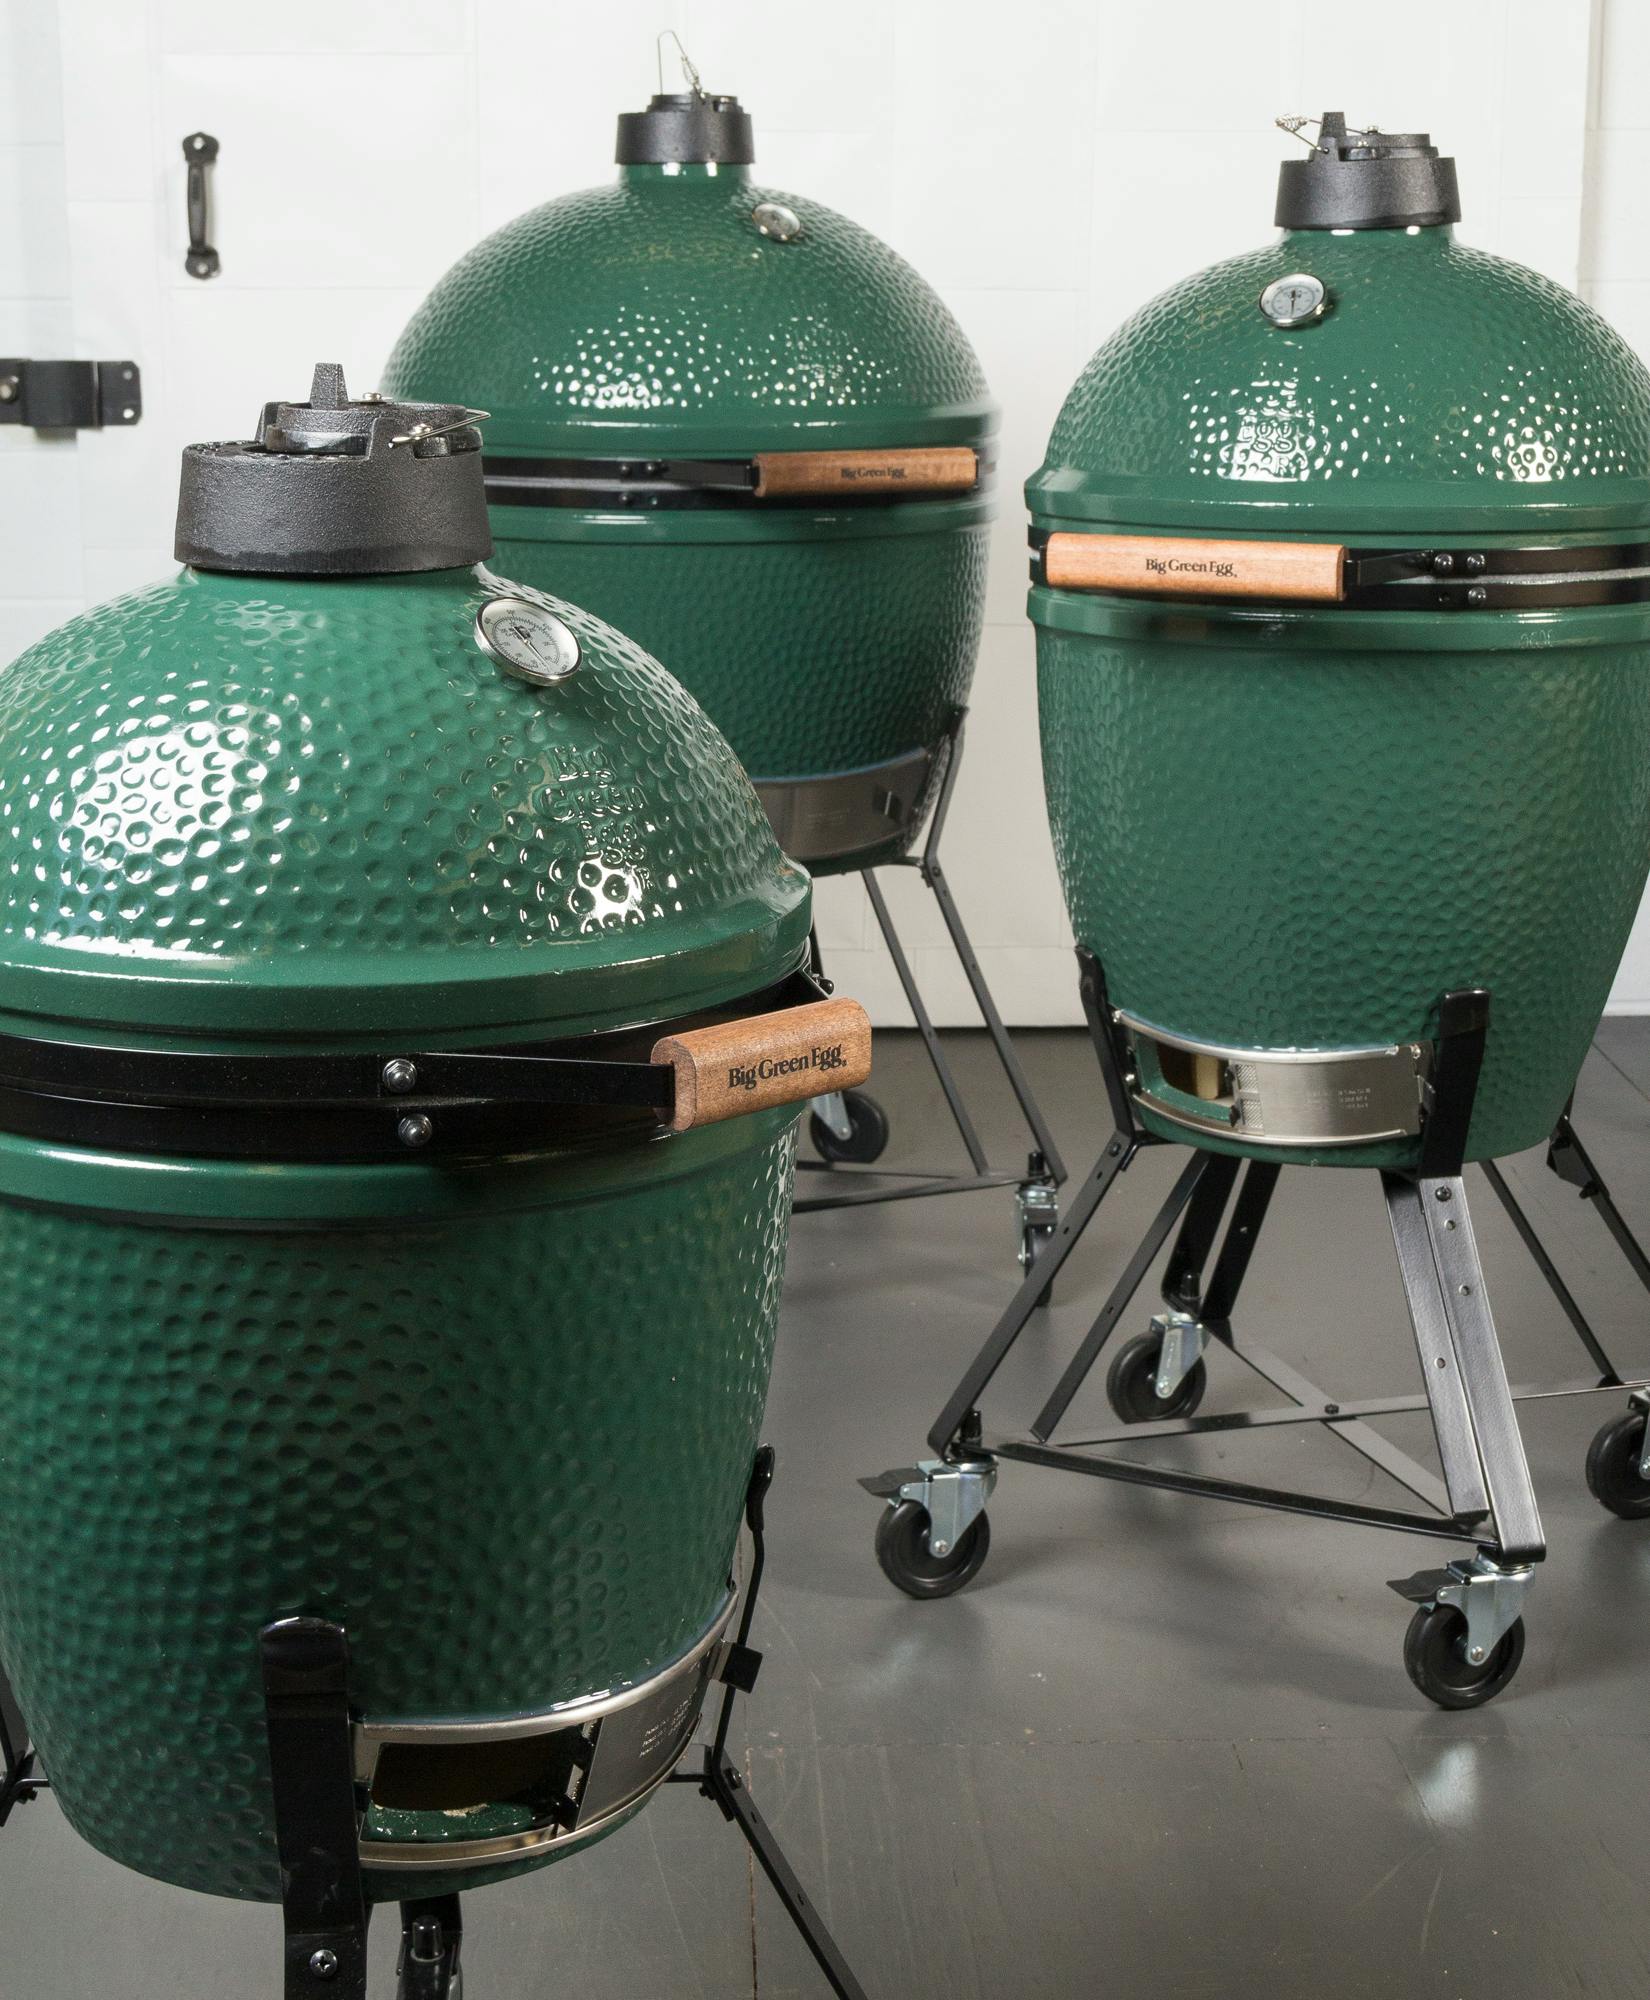 Three Kamado Grills standing next to each other.